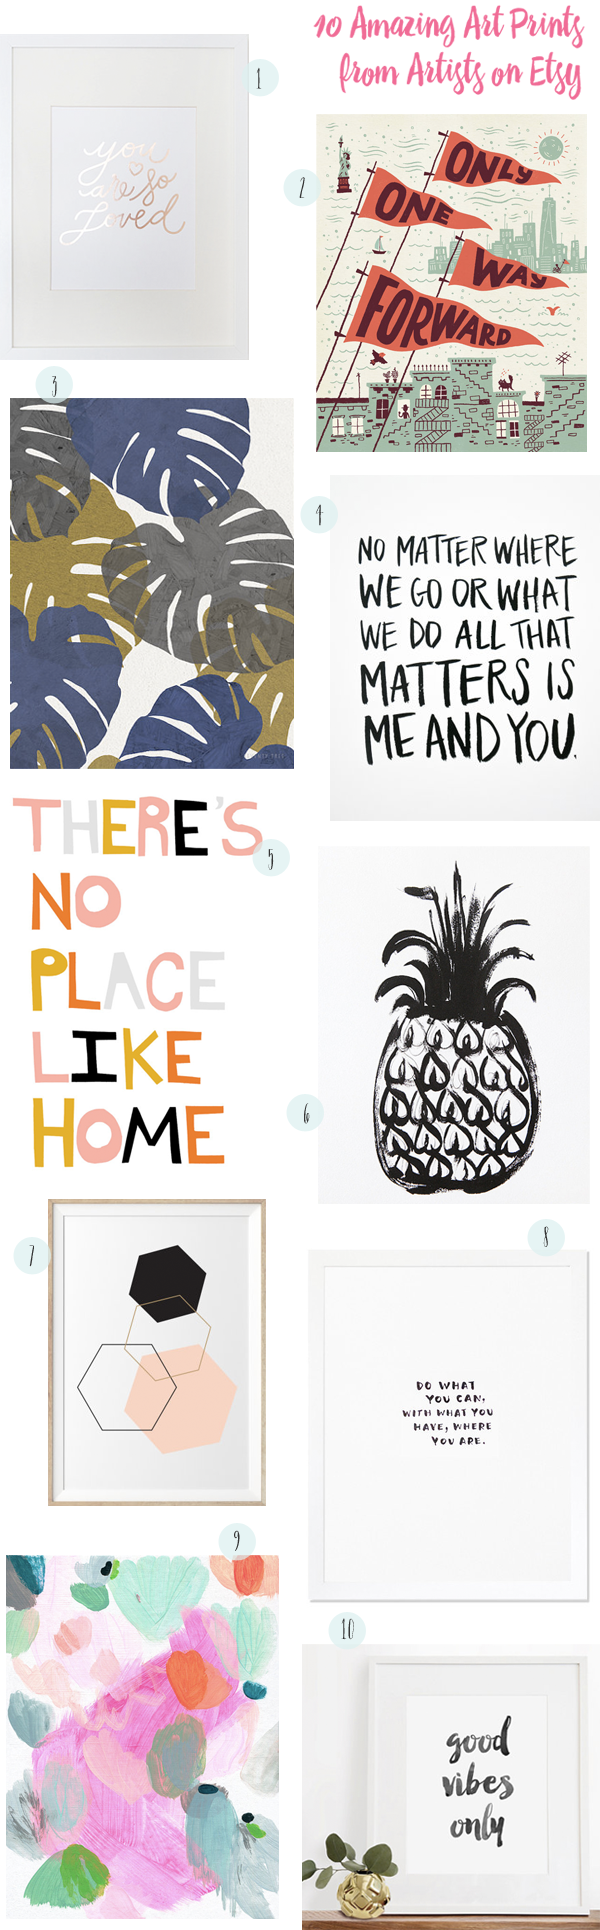 10 Awesome Art Prints from Artists on Etsy / Oh So Beautiful Paper